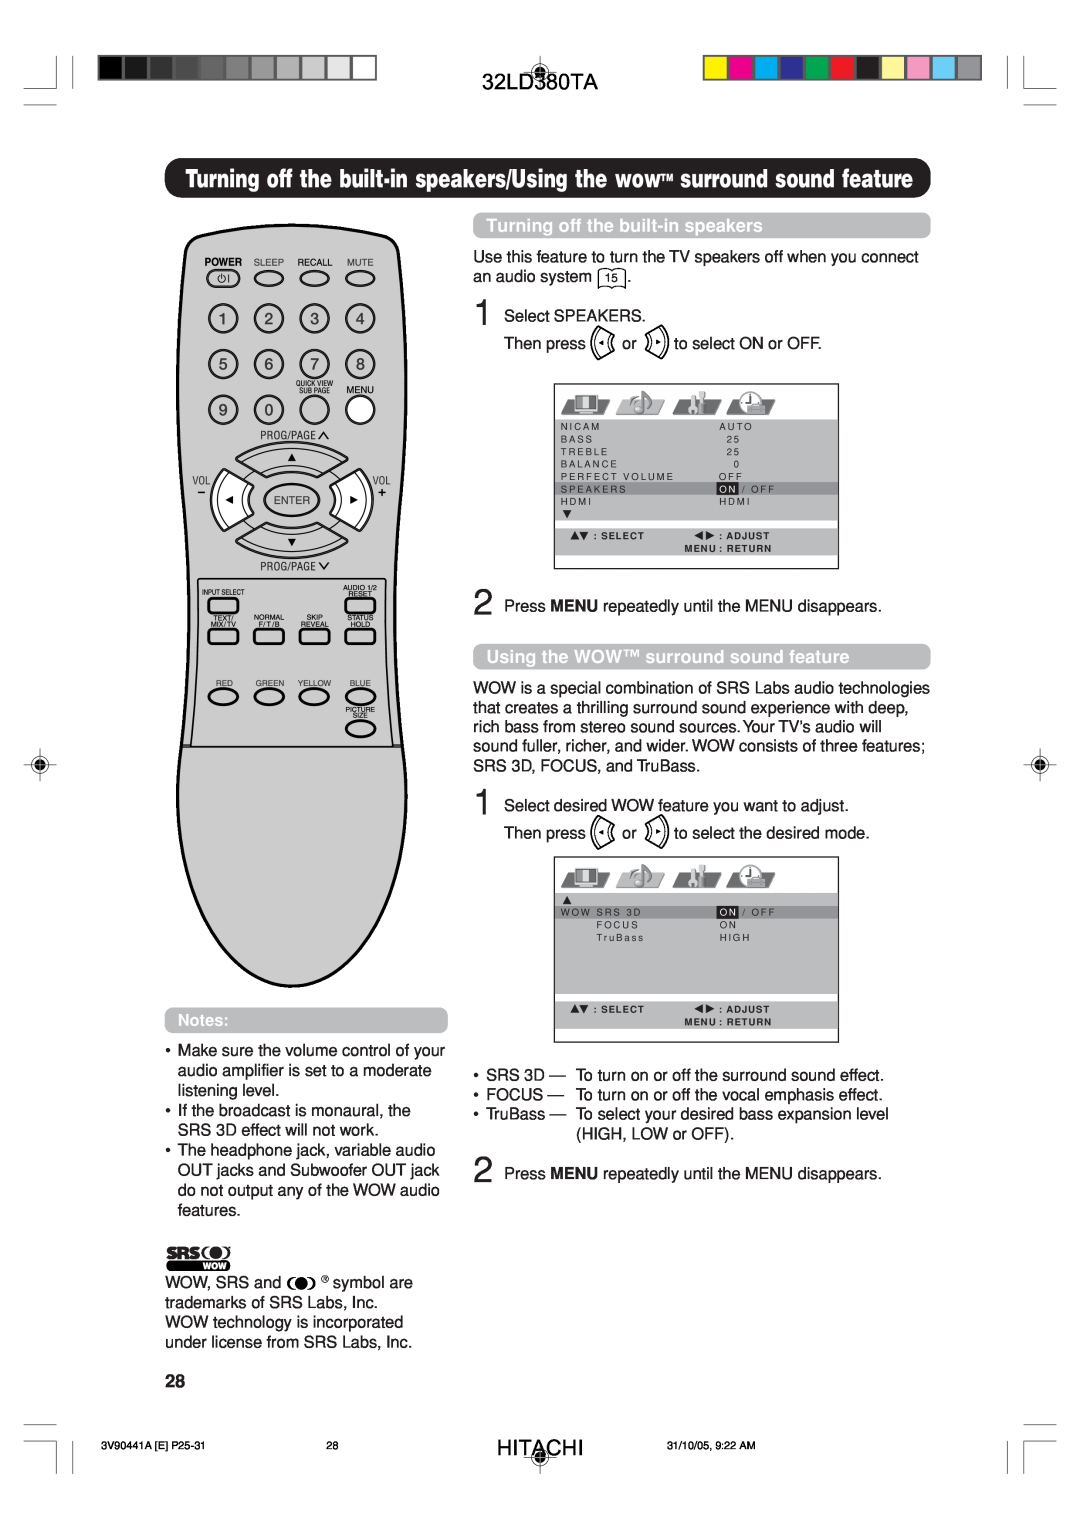 Hitachi 32LD380TA user manual Turning off the built-in speakers, Using the WOW surround sound feature, Hitachi 